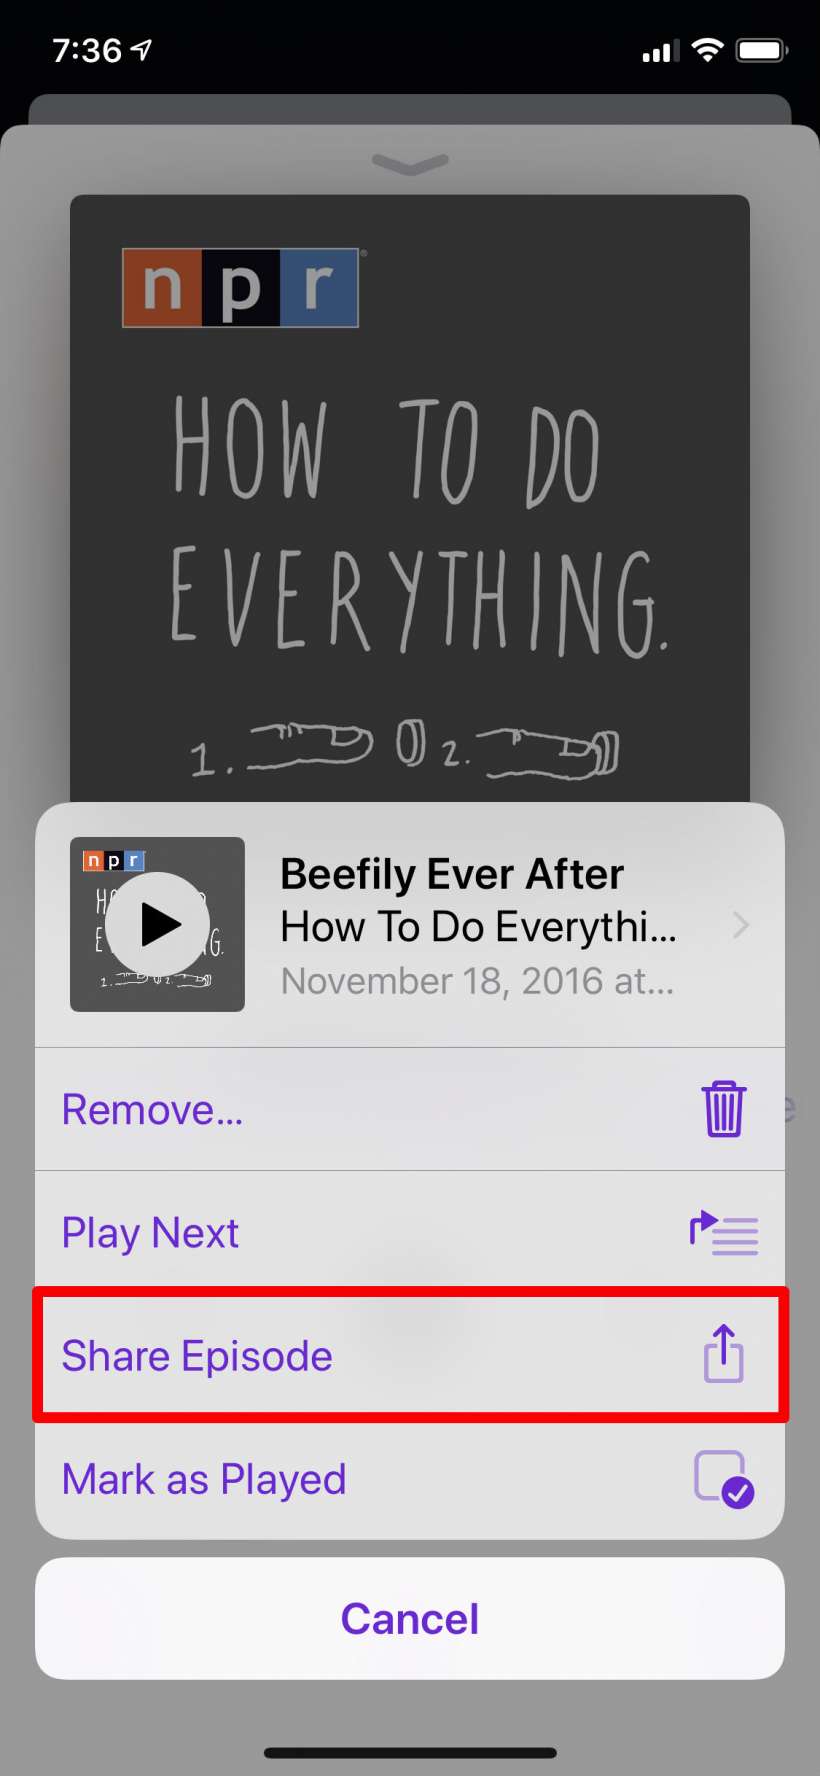 How to share podcasts on iPhone and iPad.